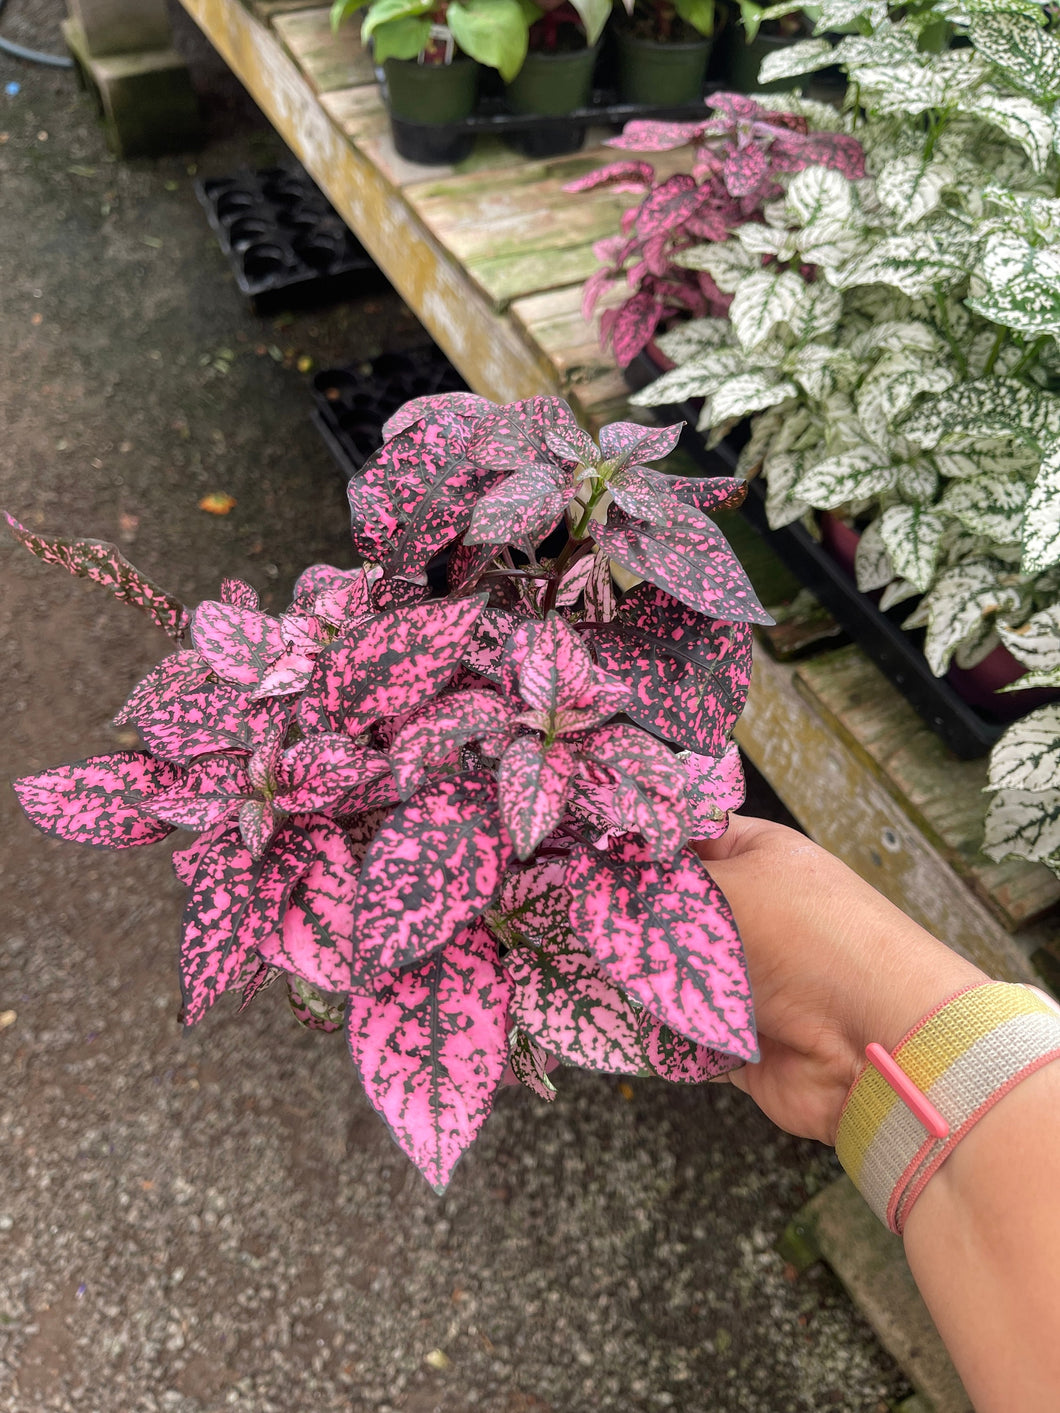 4’’ Polka dot Plant Choose your color : PINK RED WHITE